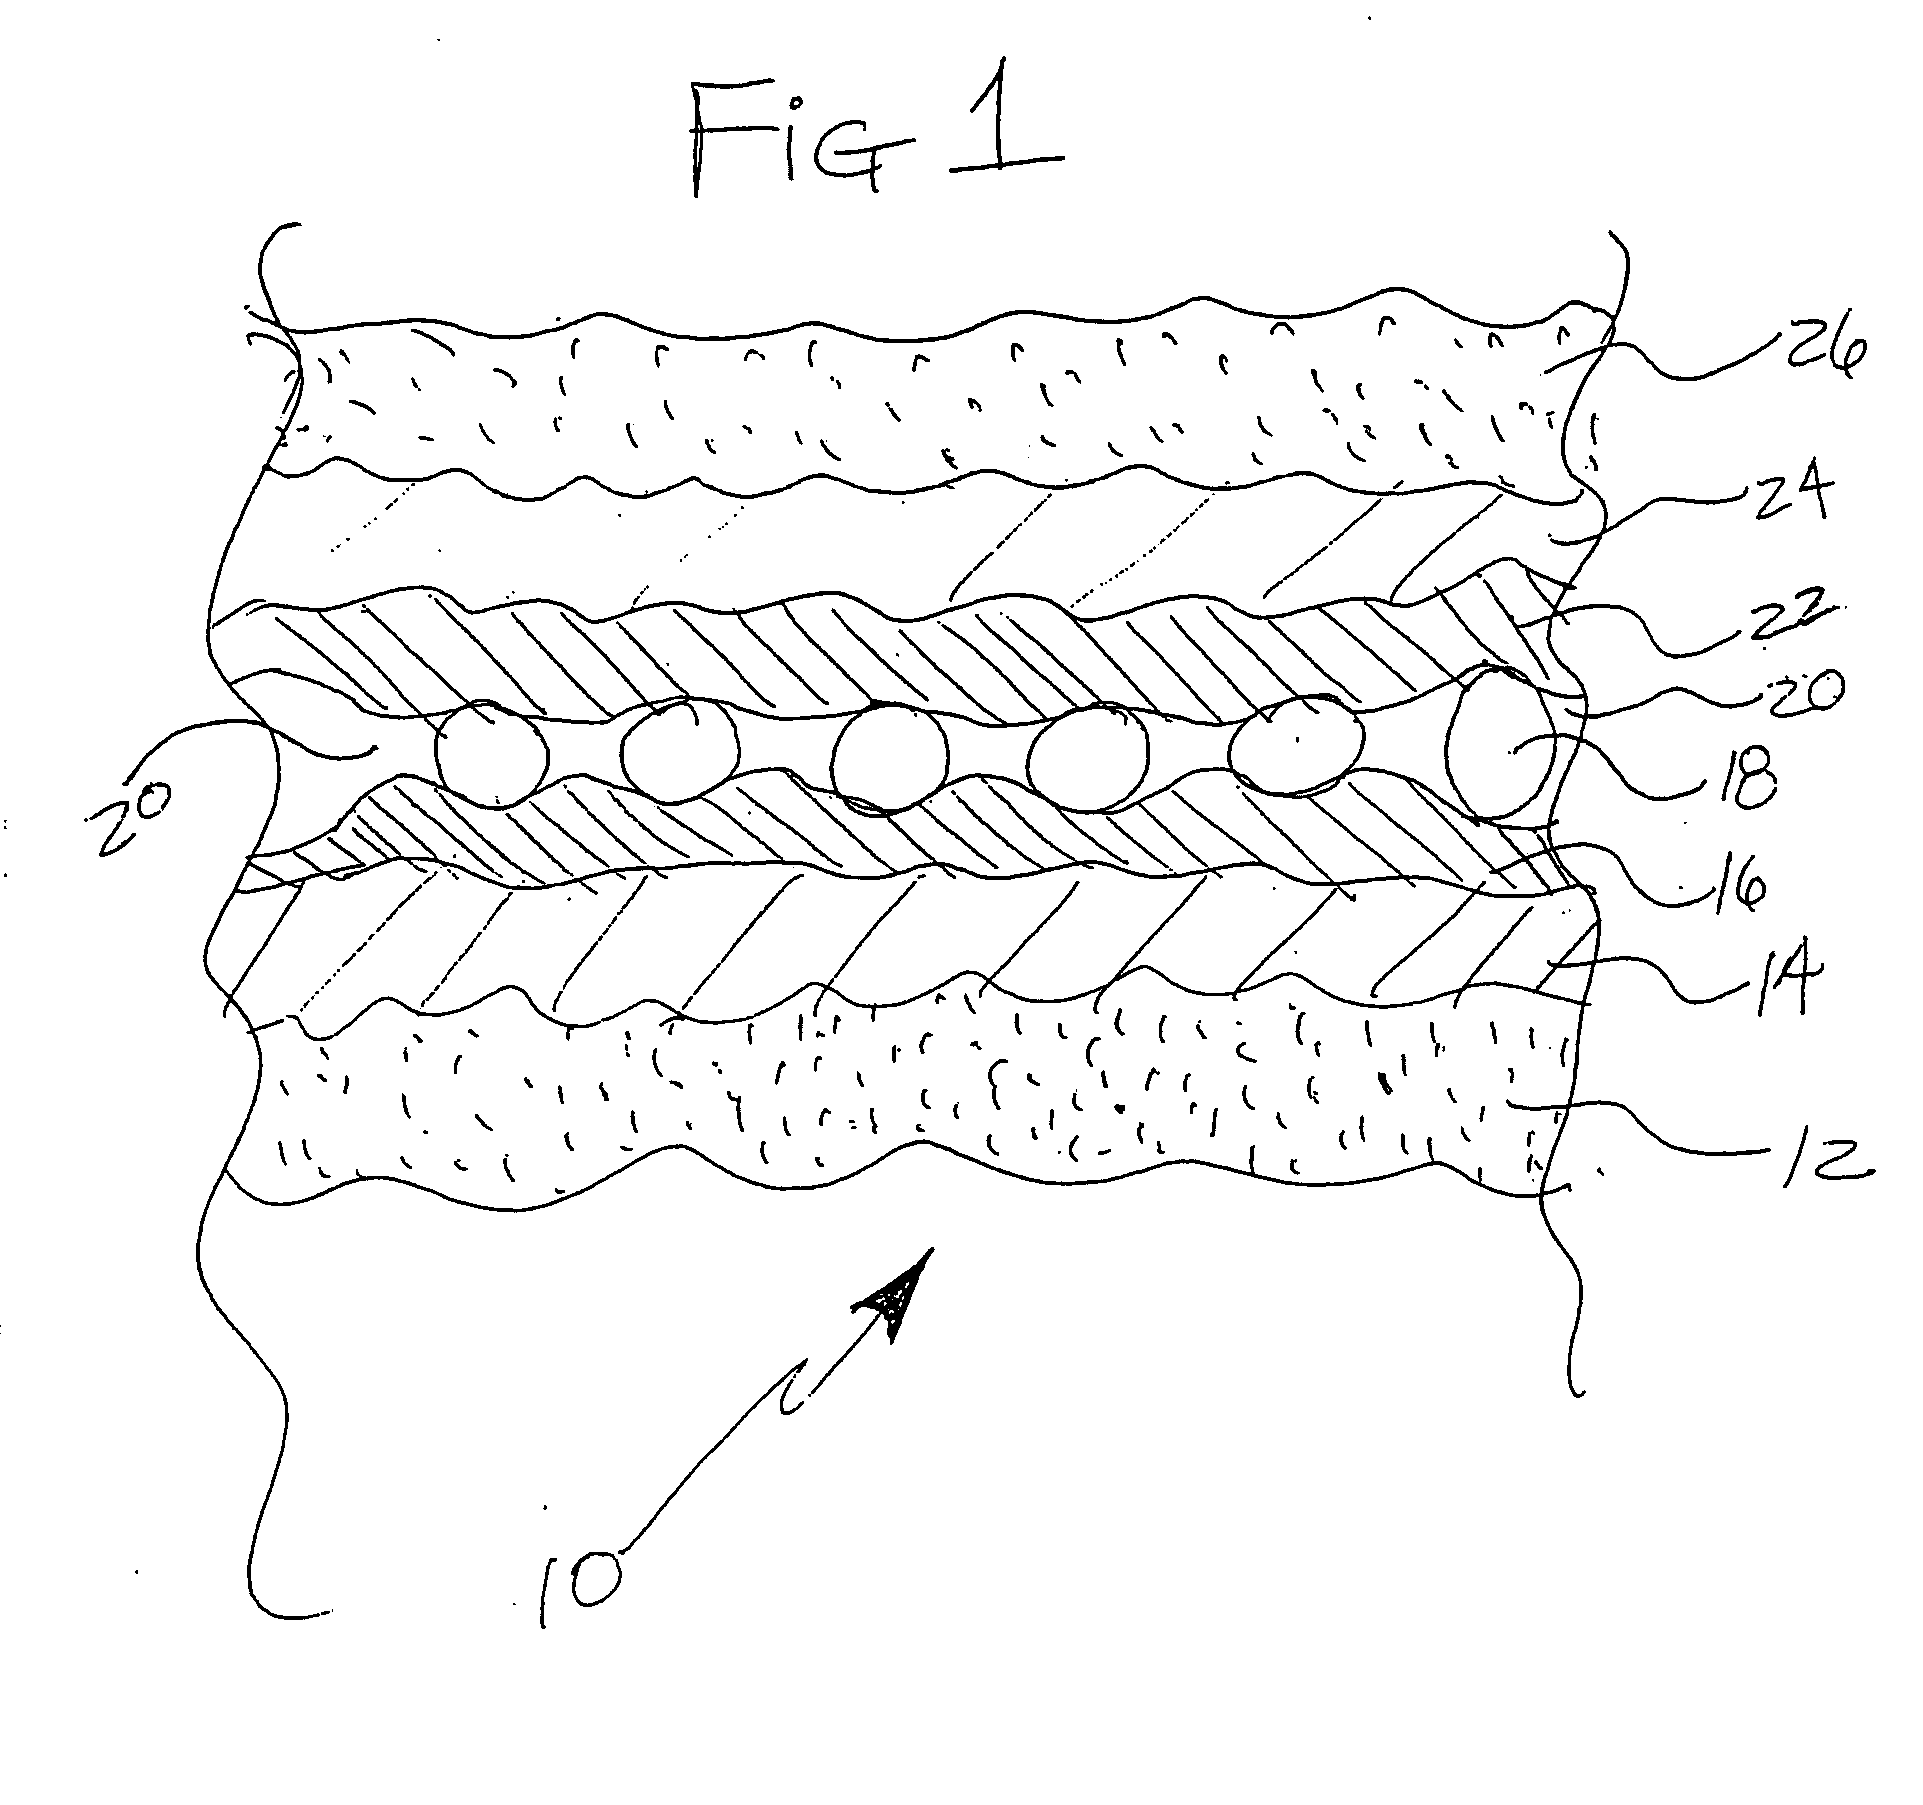 Multi-layer structure for supporting dispersed super absorbent polymeric material